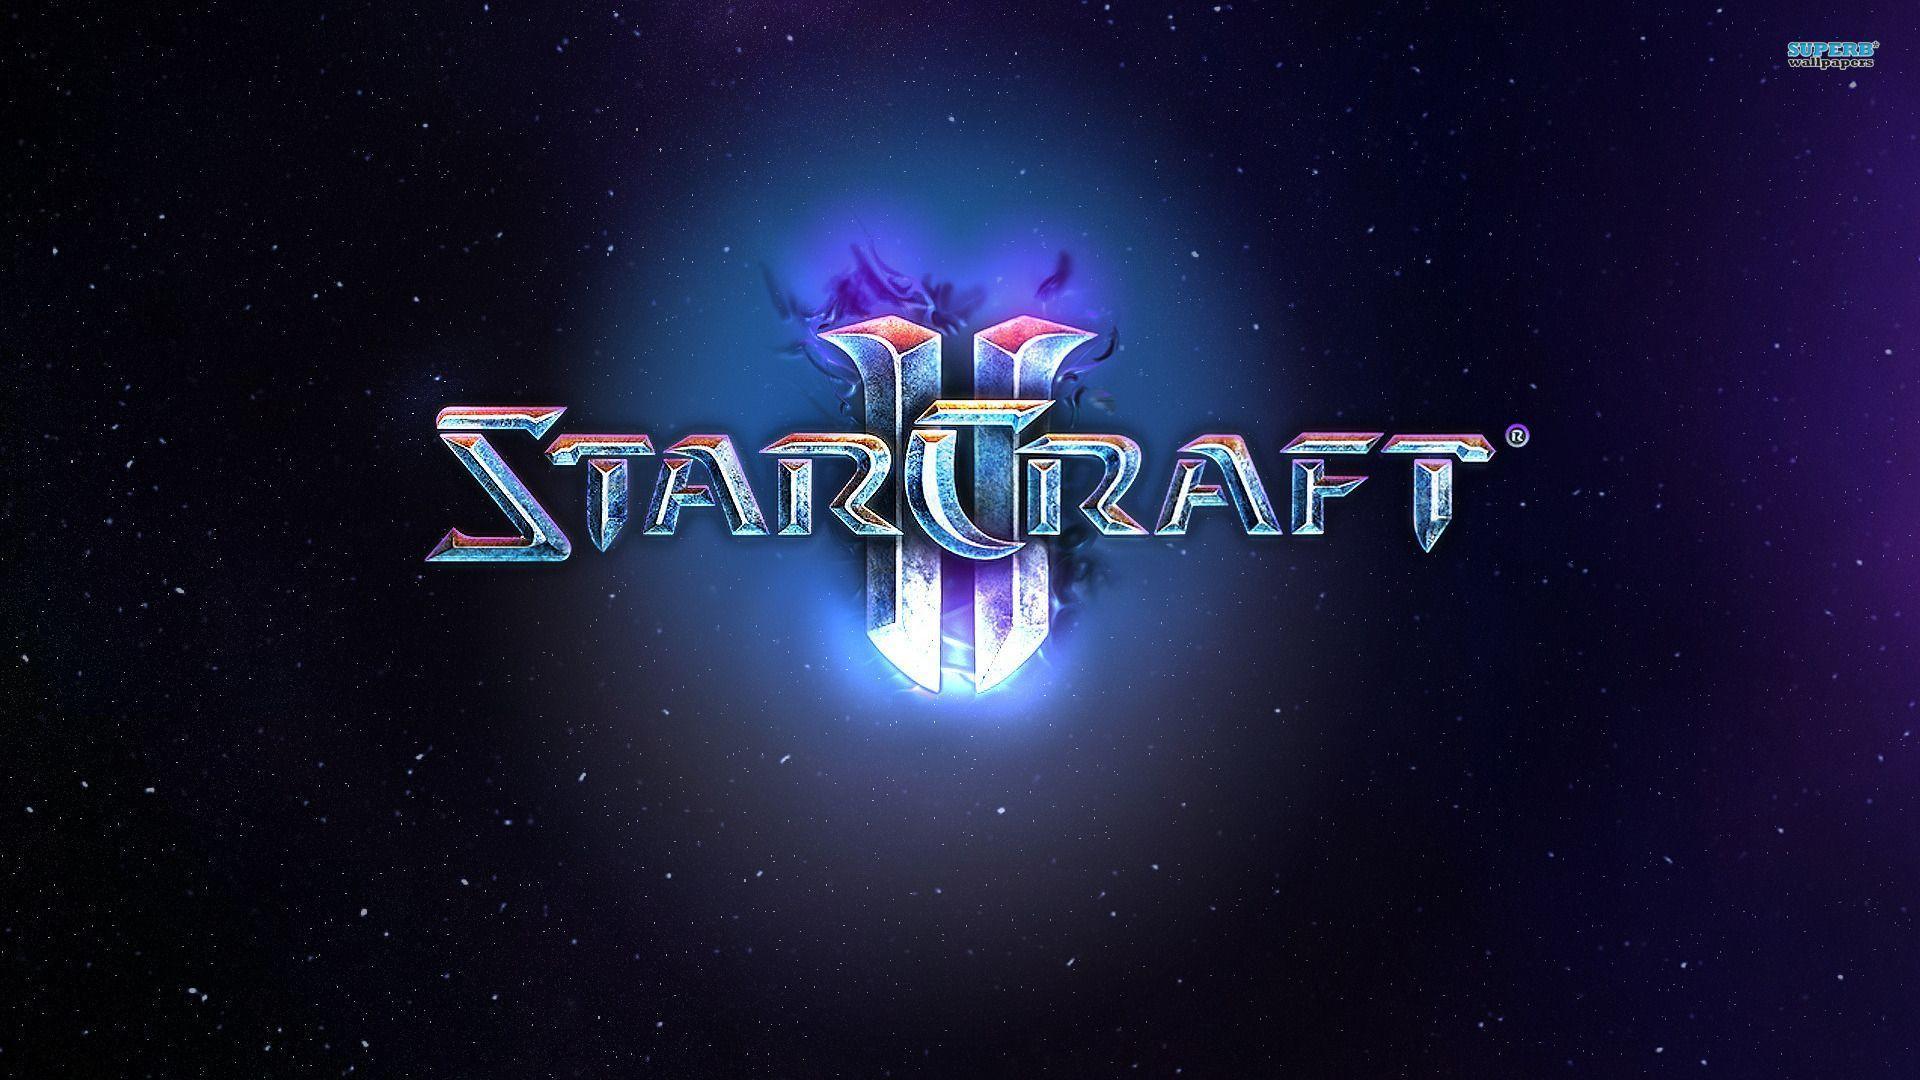 Starcraft Wallpaper Download 35115 HD Picture. Top Background Free